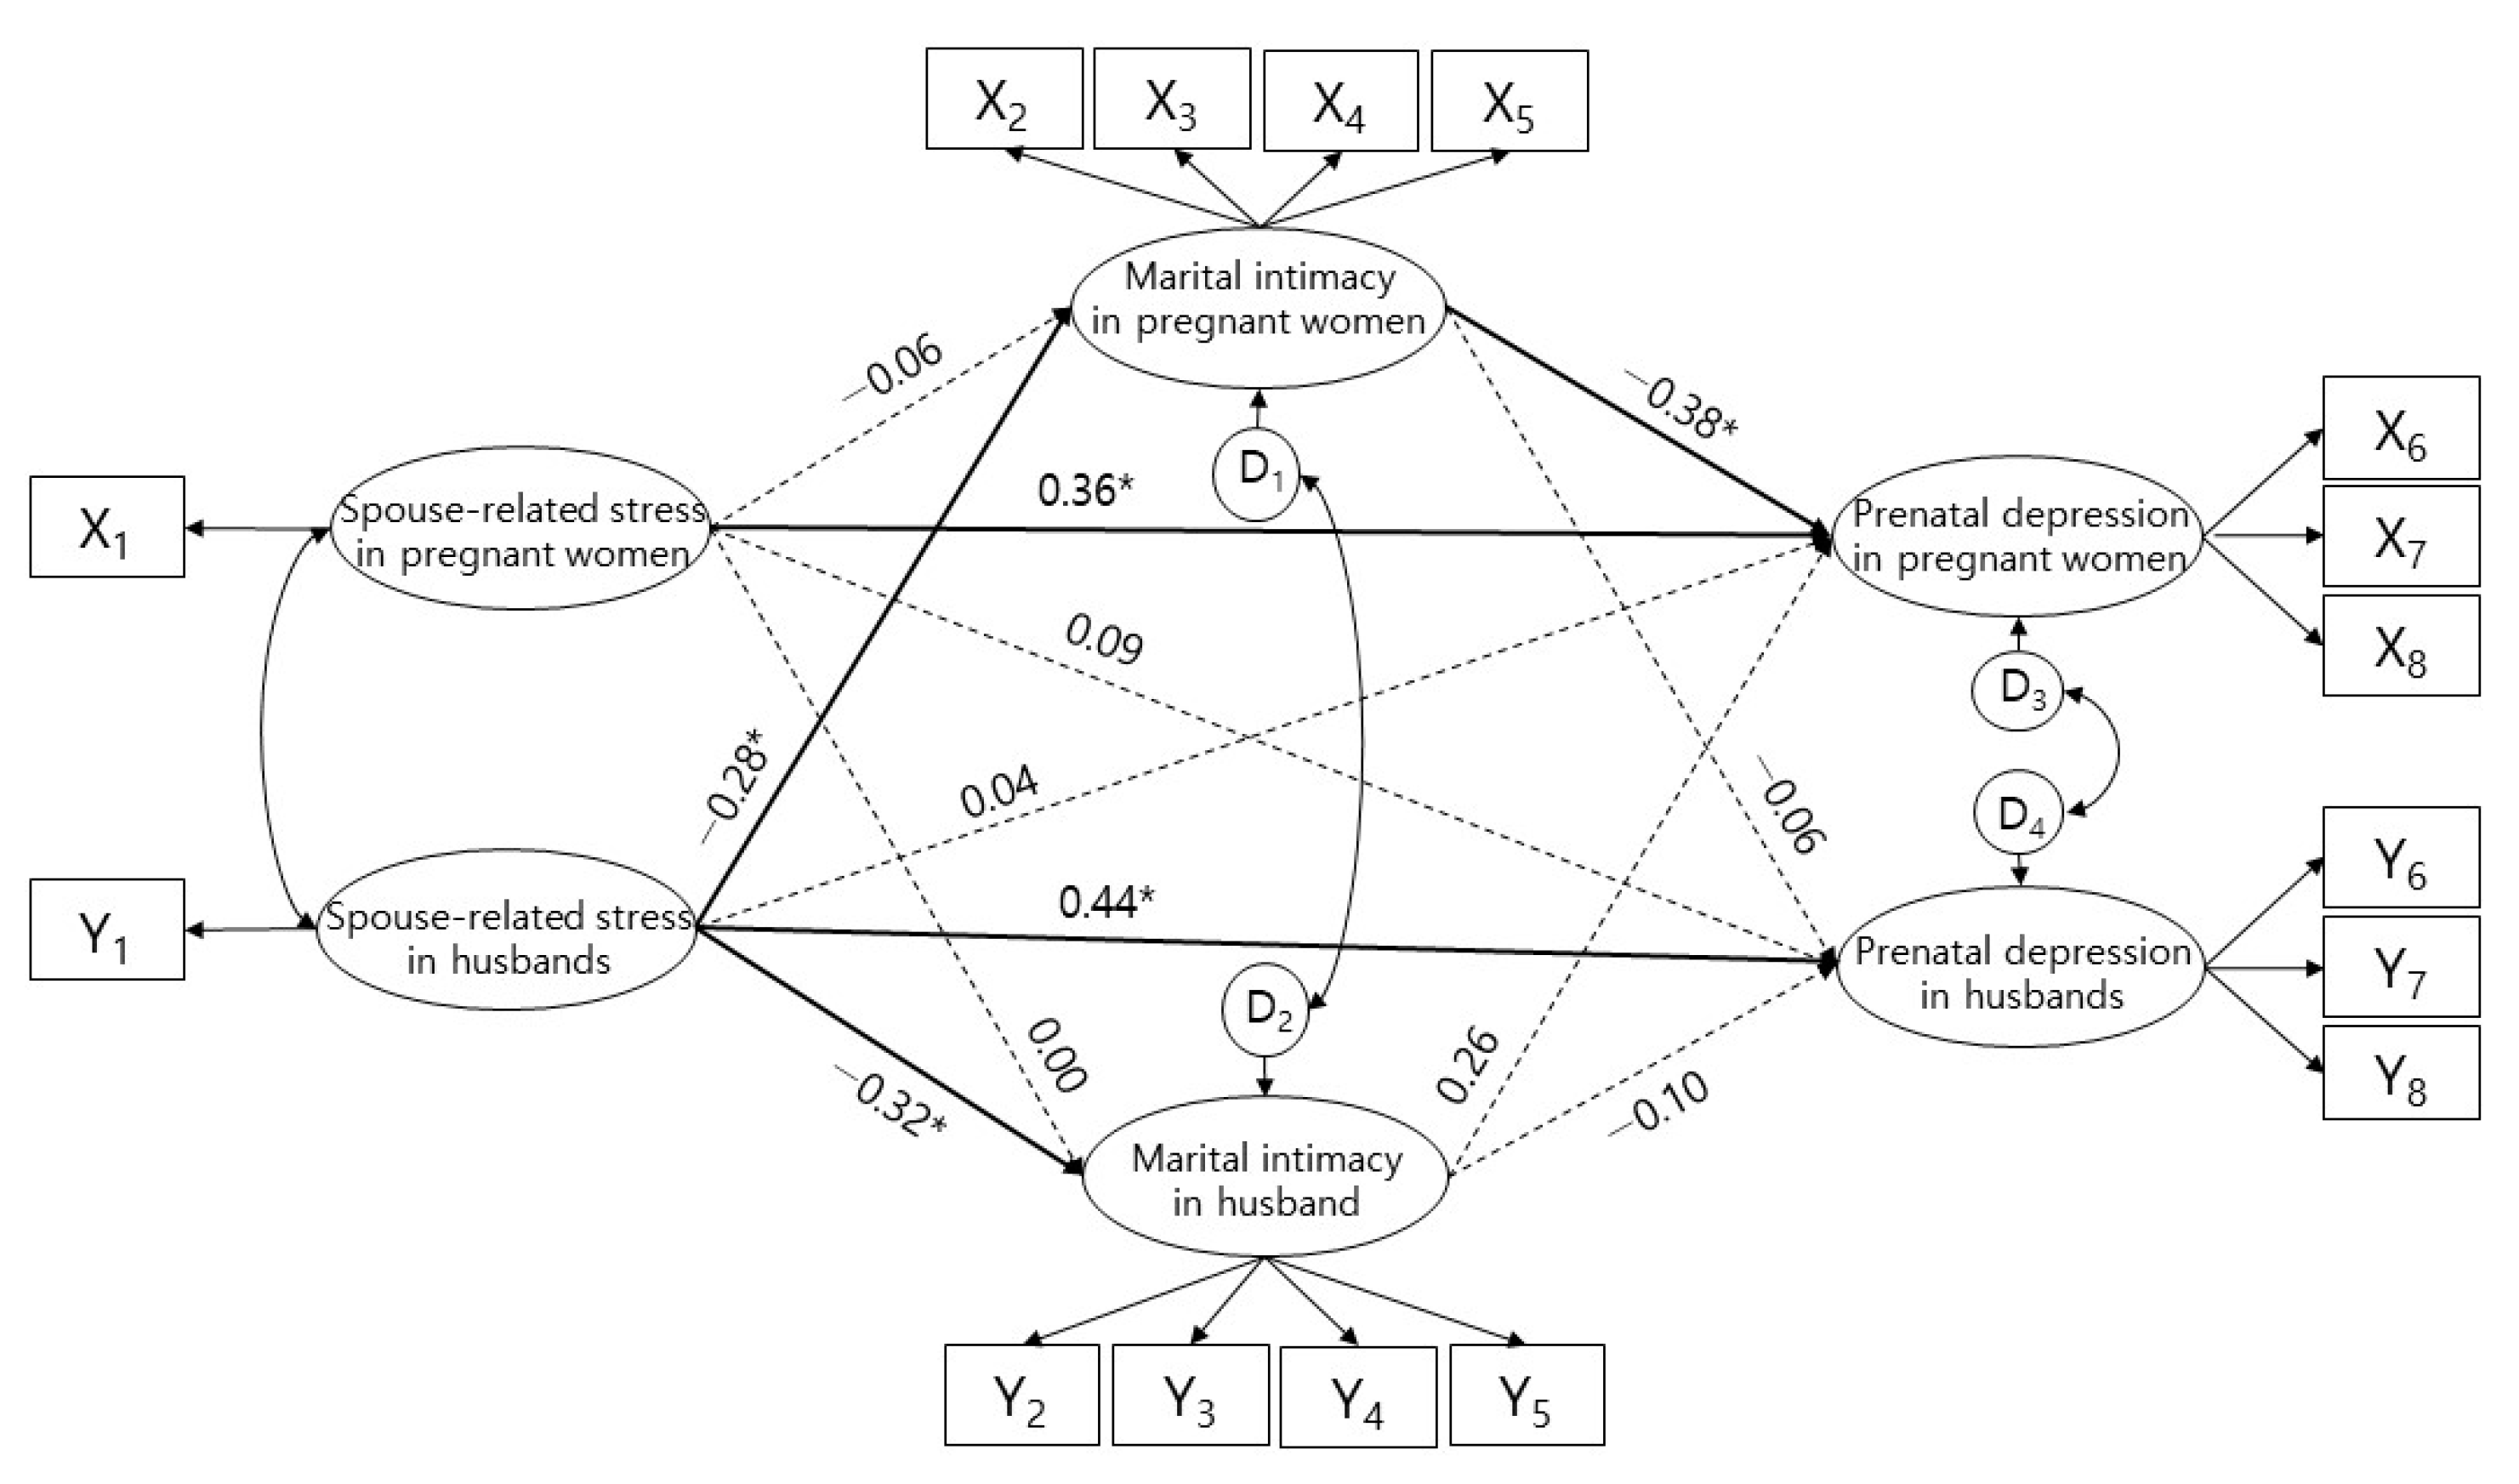 IJERPH Free Full-Text The Mediating Effect of Marital Intimacy on the Relationship between Spouse-Related Stress and Prenatal Depression in Pregnant Couples An Actor–Partner Interdependent Model Test